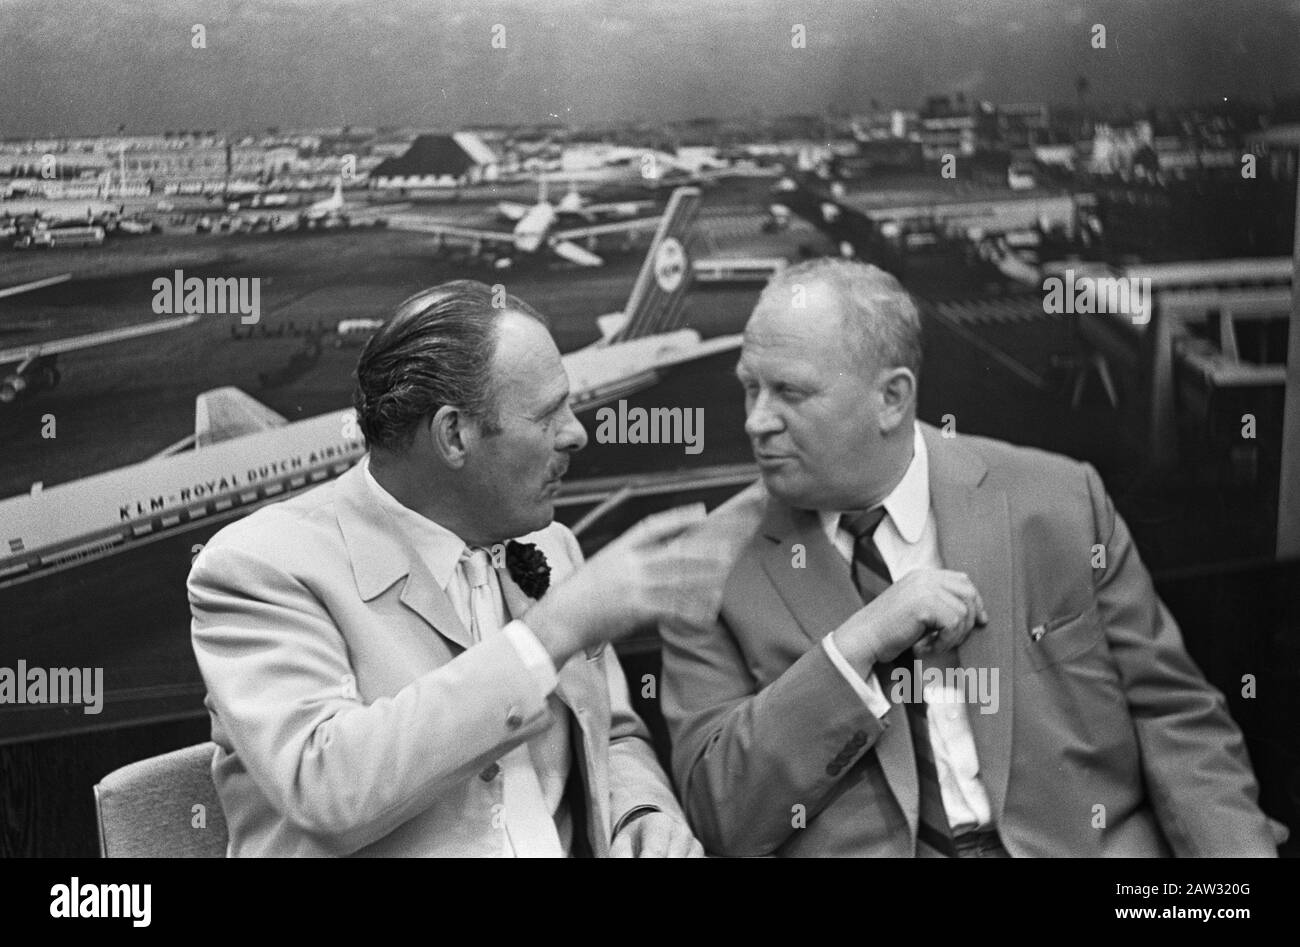 Premiere of the film Zany guys in their flying crates (English title Those Magnificent Men in their Flying Machines) in the Netherlands. Terry-Thomas and Gert Fröbe (right) during press conference at Schiphol Date: July 15, 1965 Location: North-Holland, Schiphol Keywords: actors, movie stars, press conferences Person Name: Fröbe Gert Thomas, Terry Stock Photo